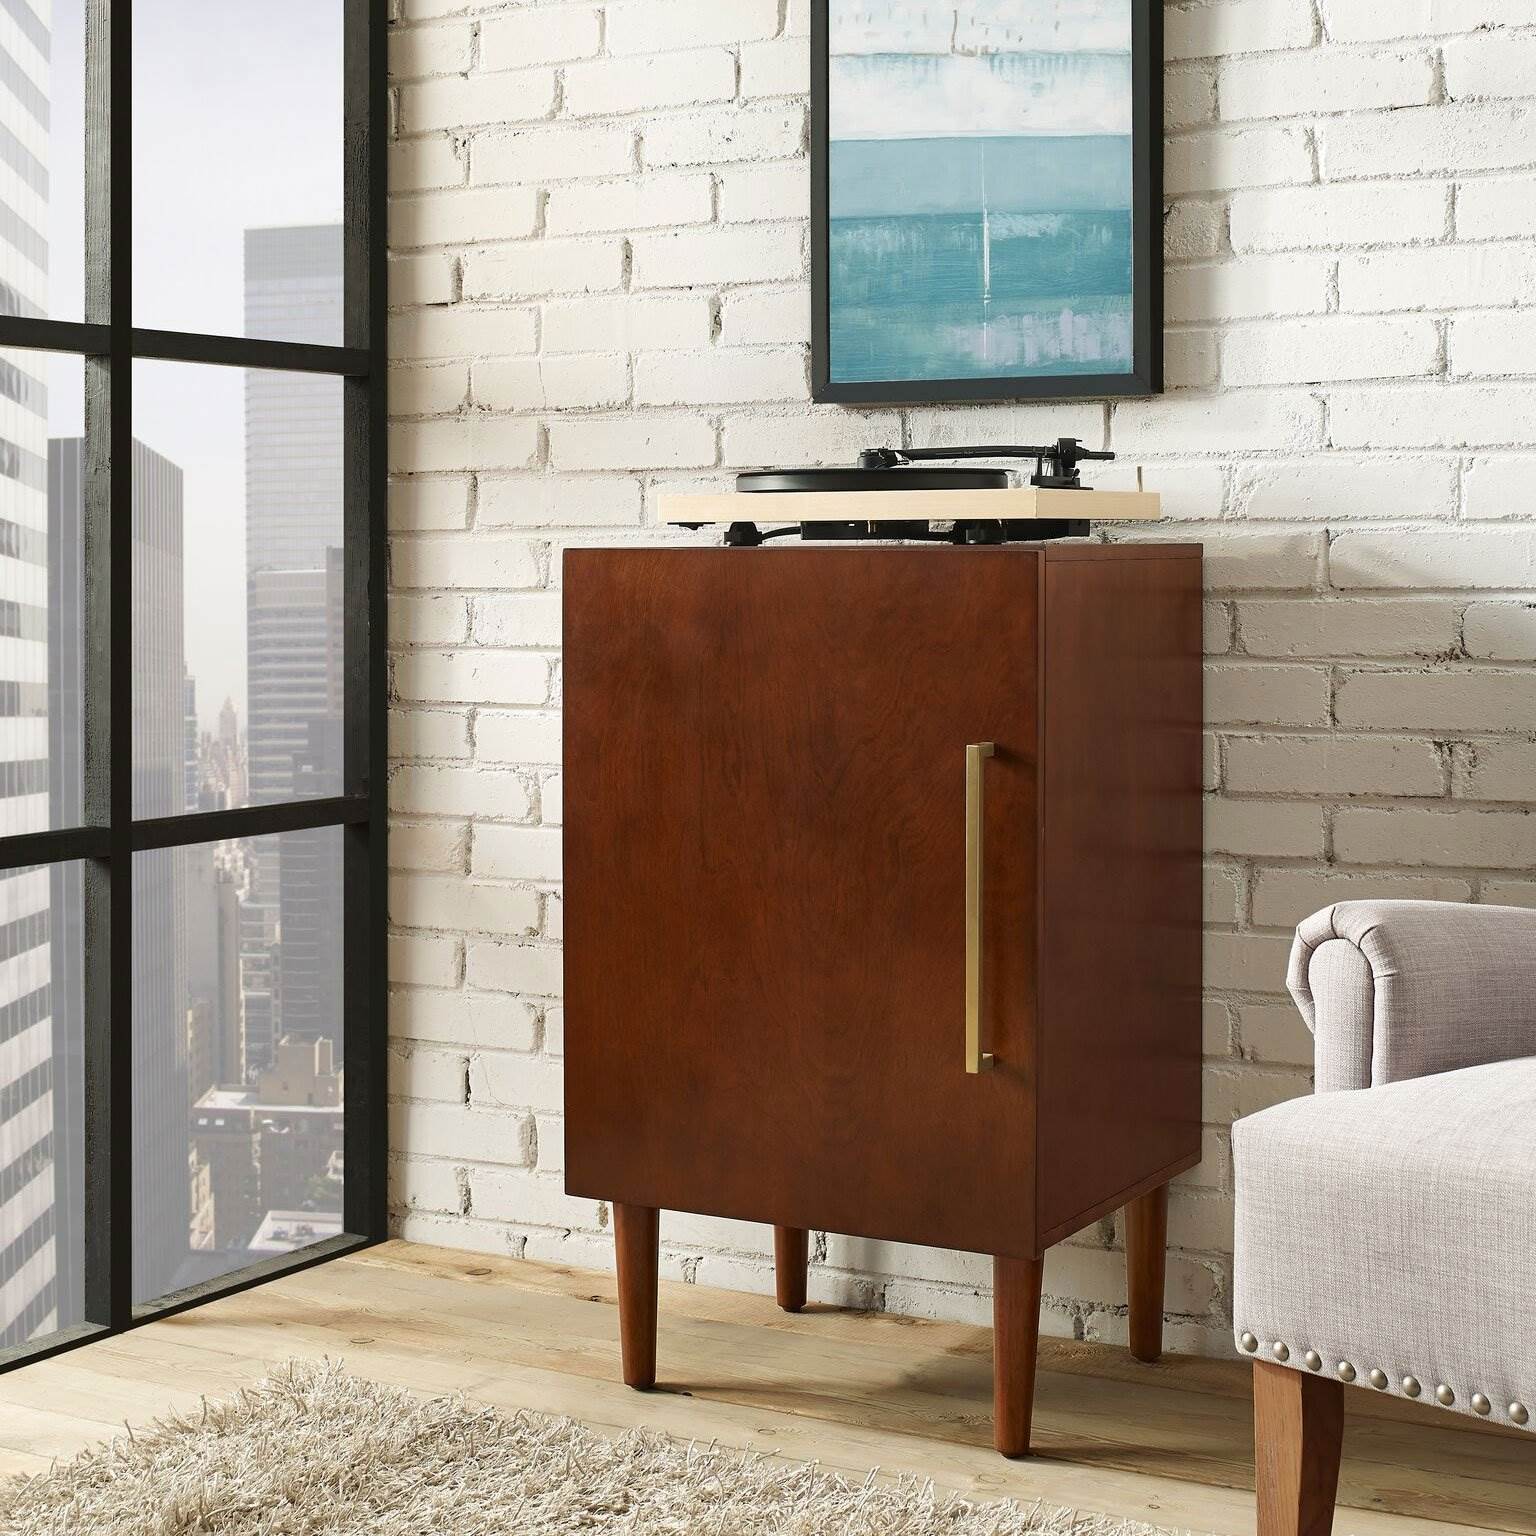 Crosley Mid Century Modern Everett Record Player Turntable Stand Storage Cabinet - image 1 of 11